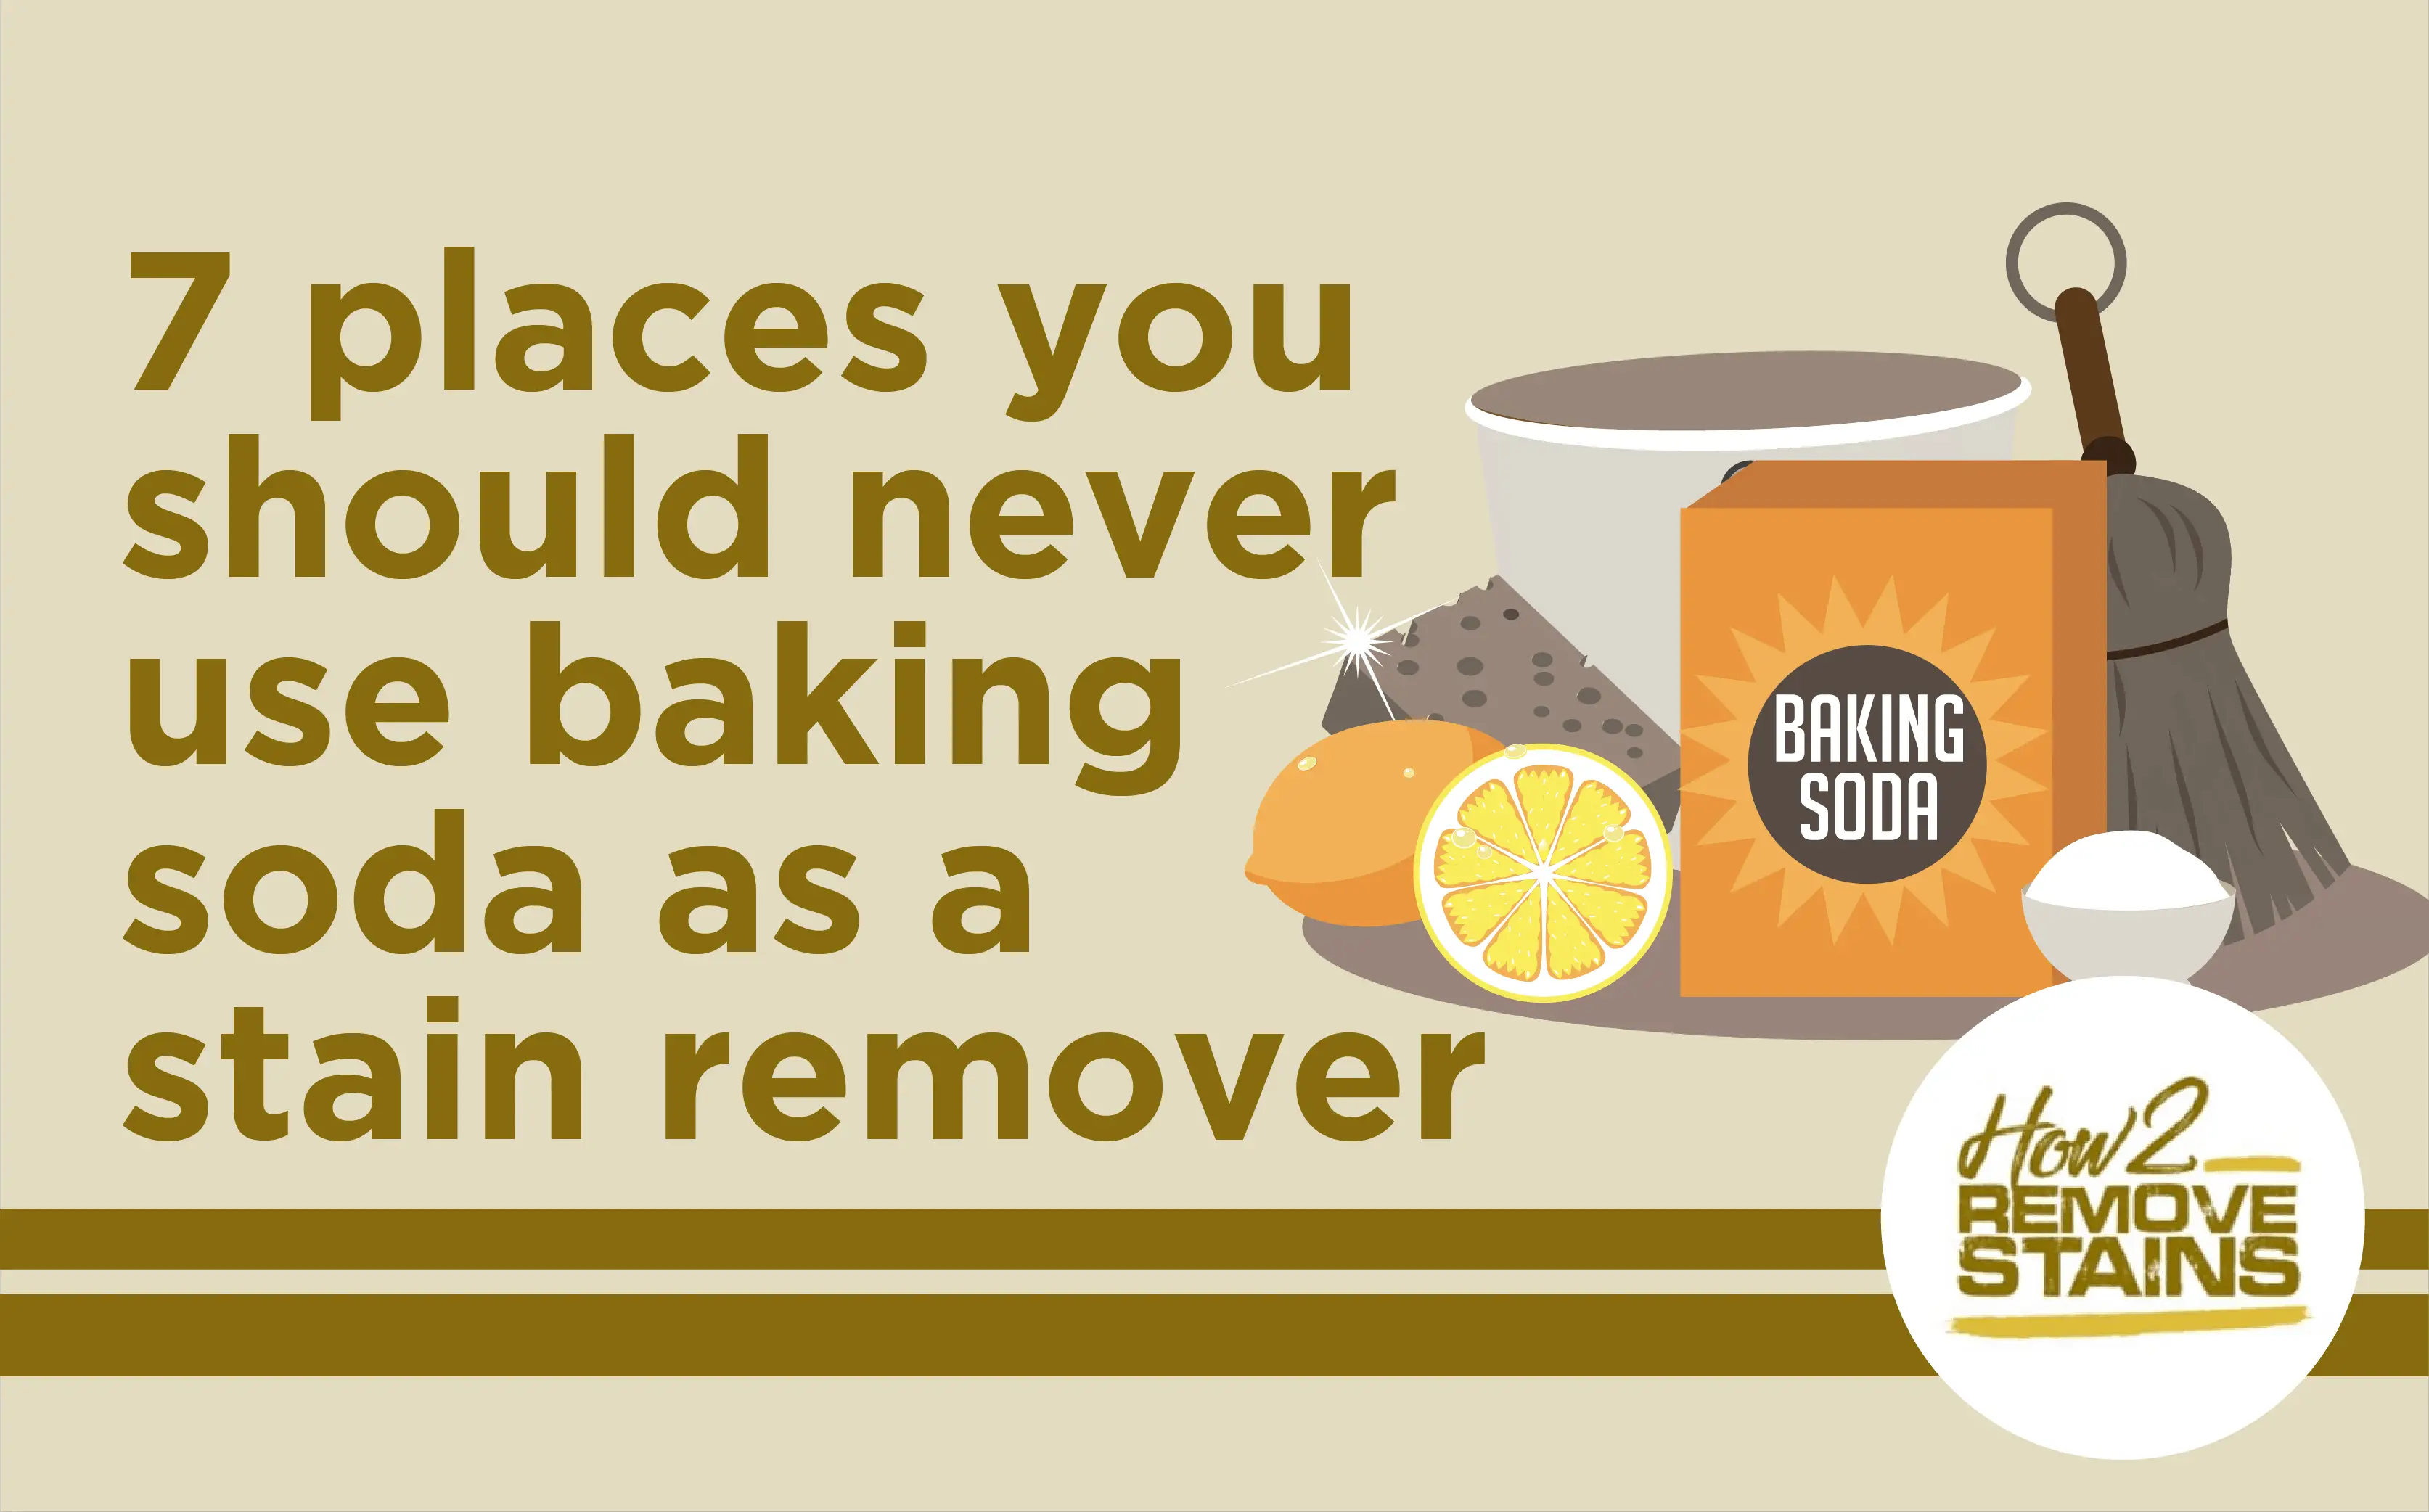 Baking Soda as stain remover